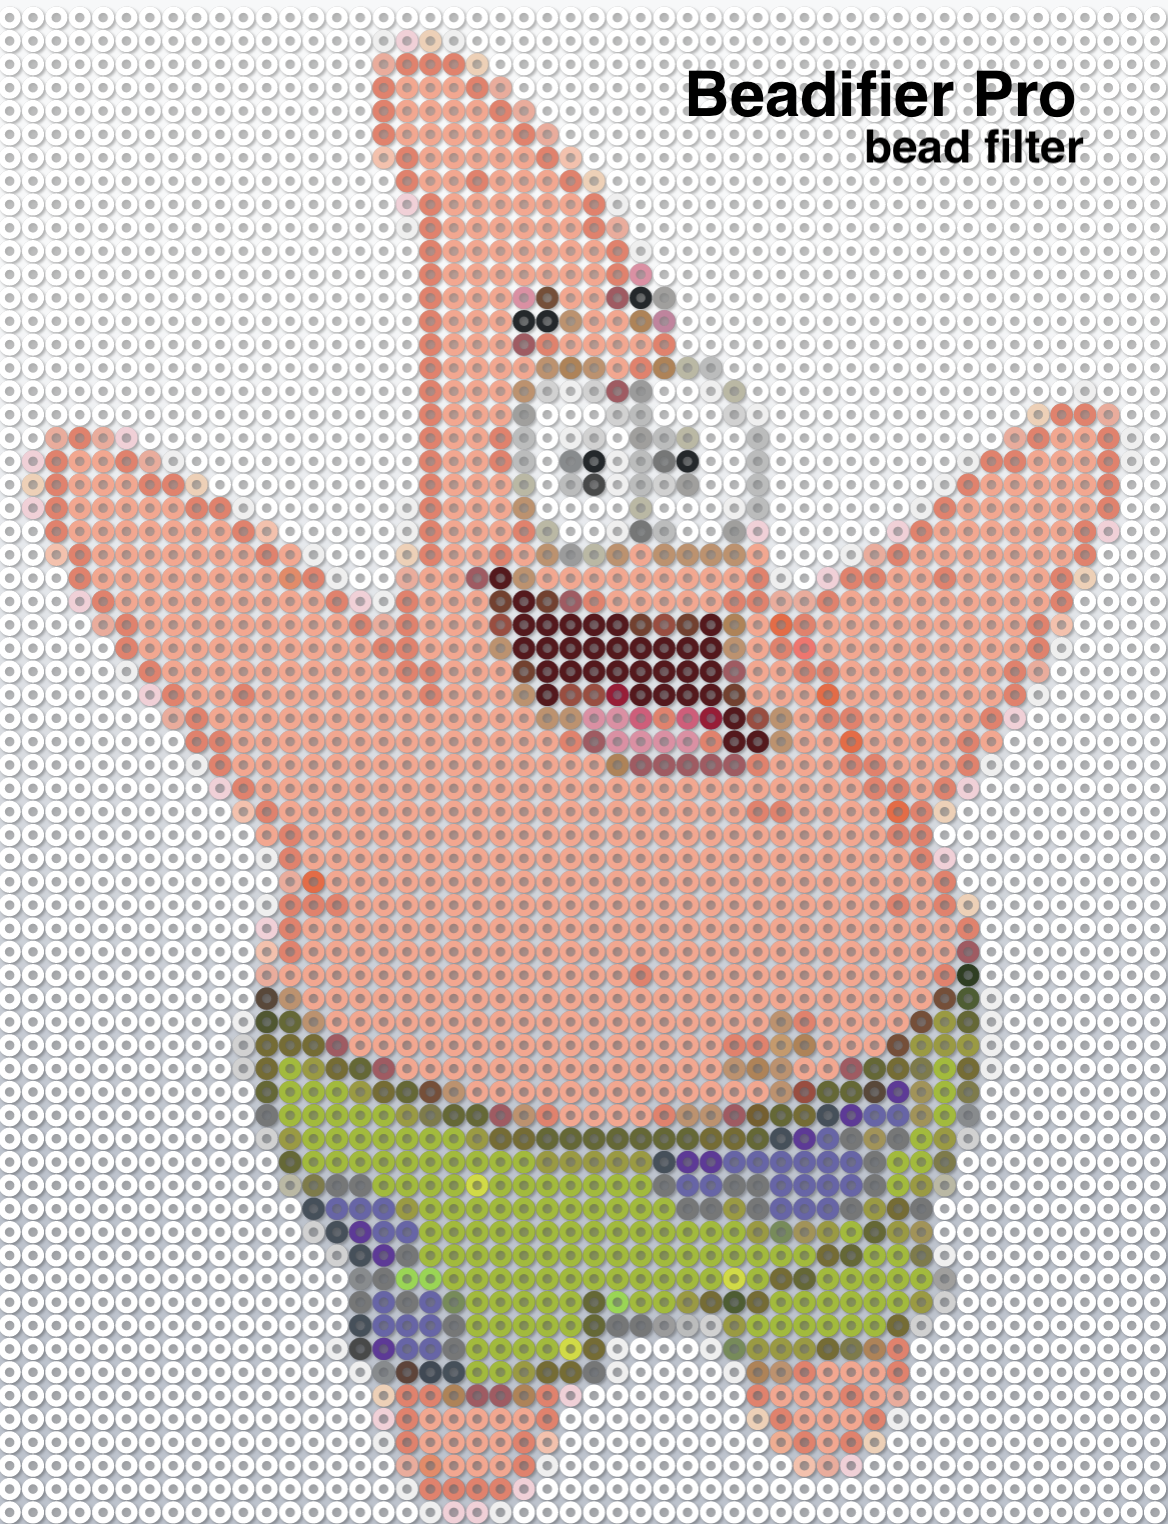 Pixel-Beads - Convert pictures into fuse bead patterns for free